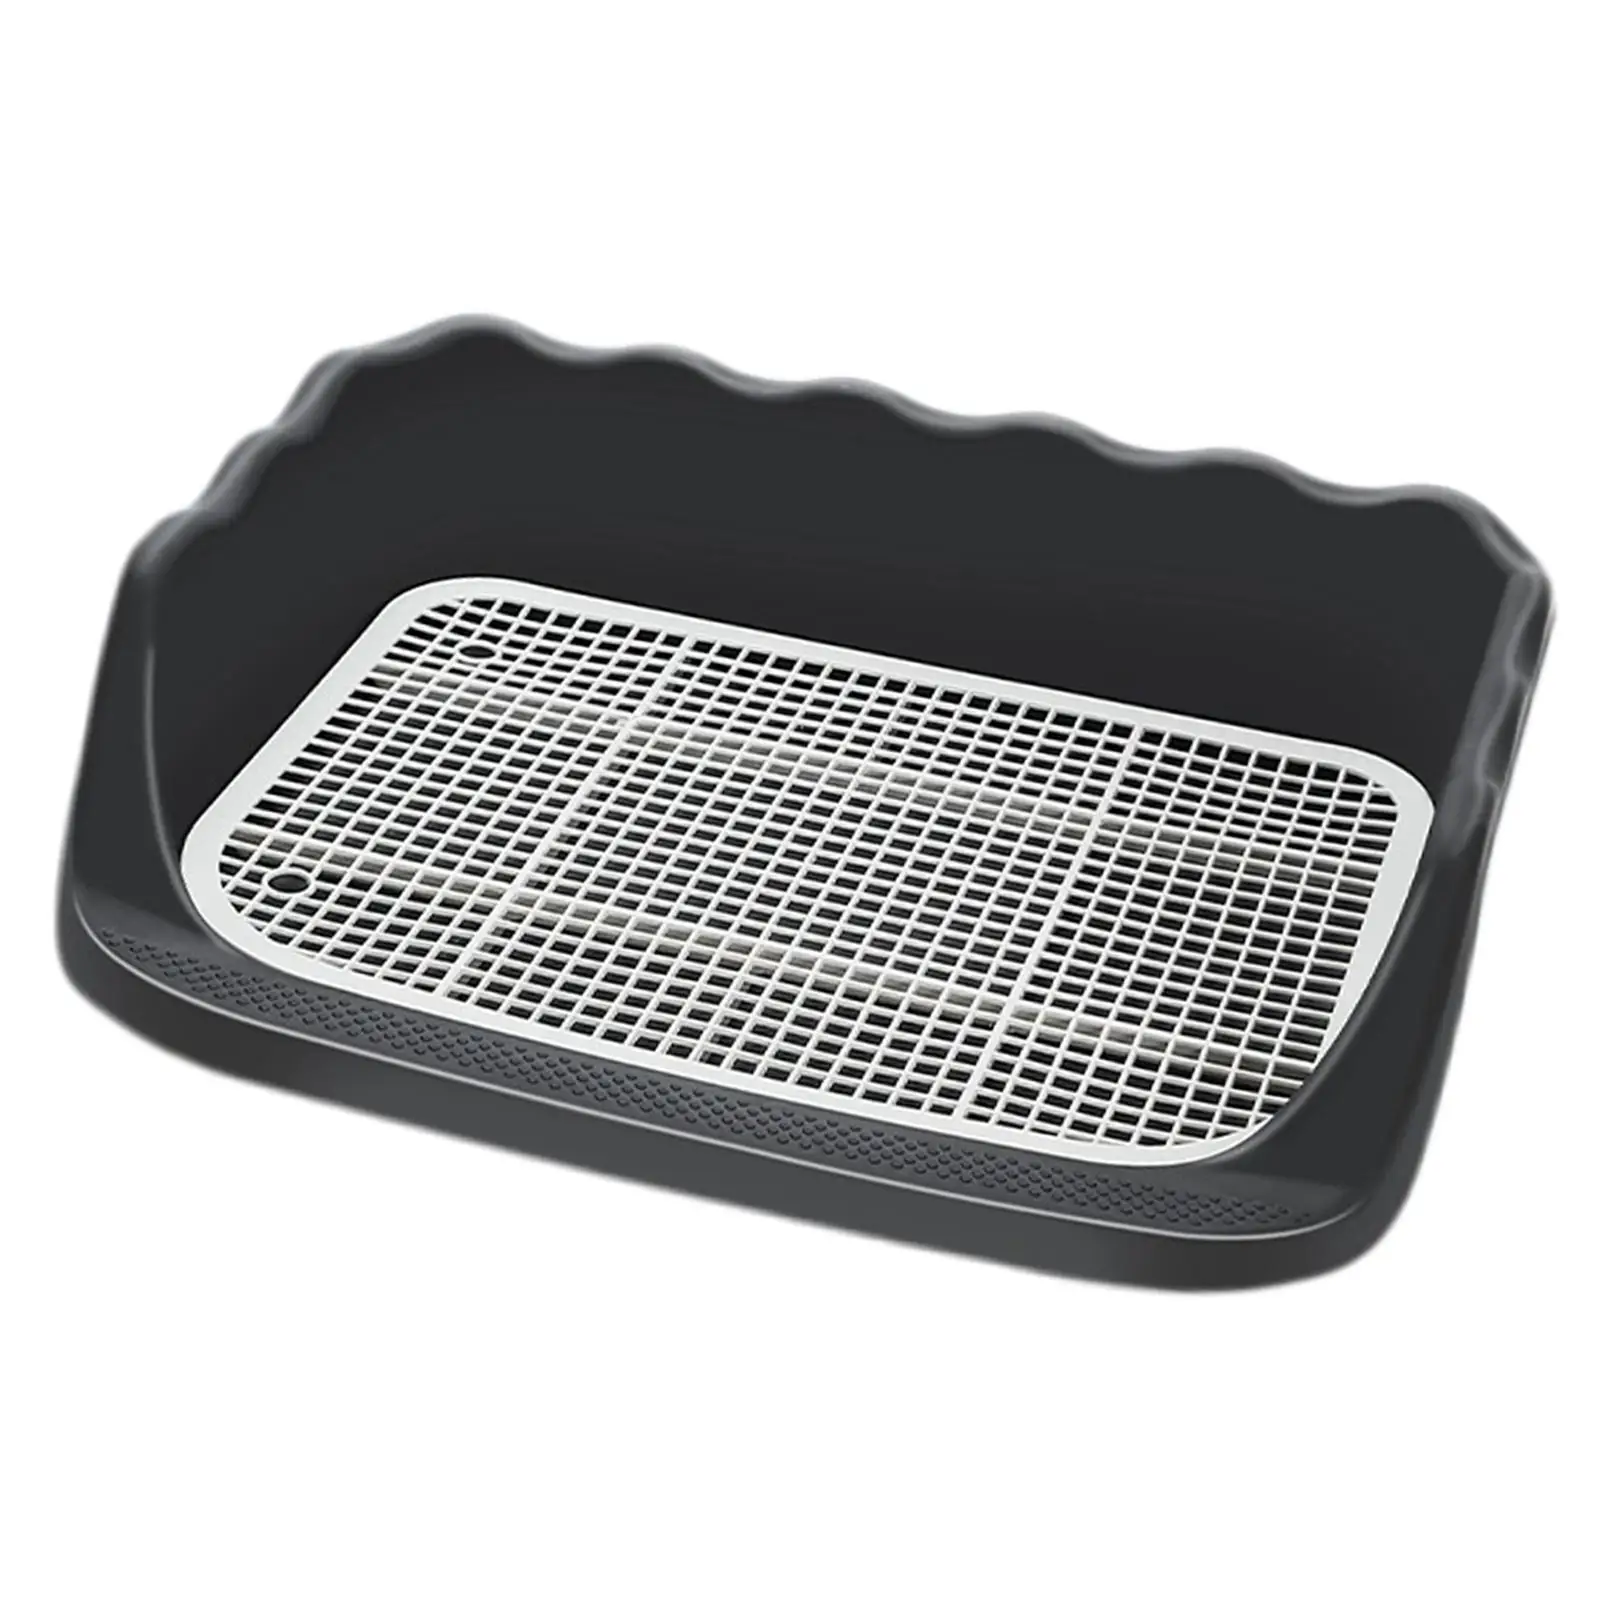 Mesh Dog Toilet Pee Pad Holder Puppy Training Tray for Small and Medium Dogs Indoor Dog Potty Tray